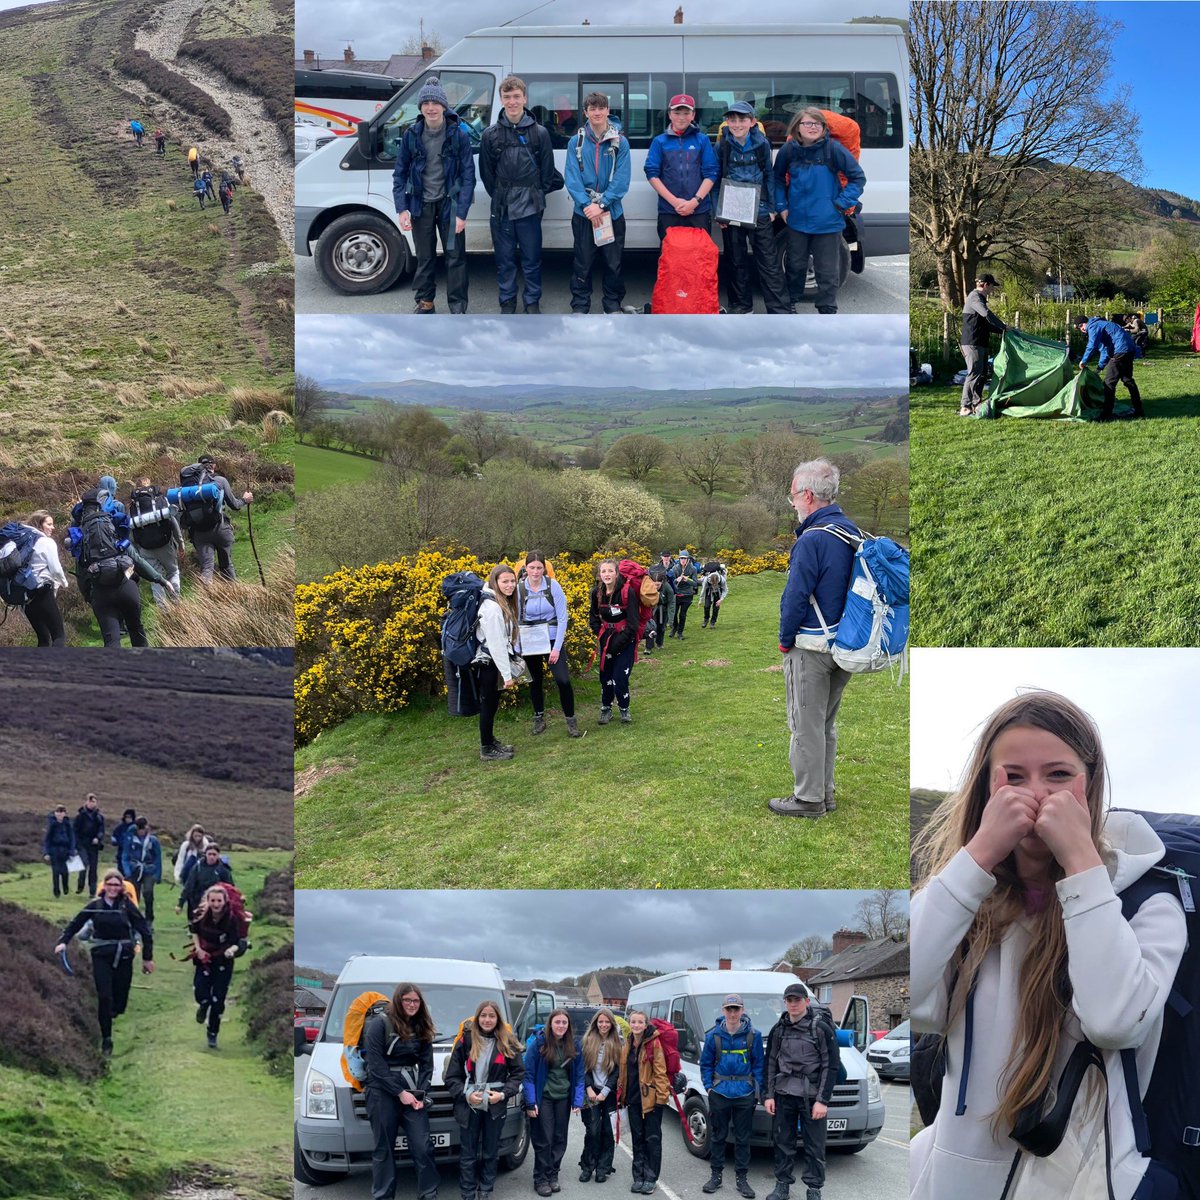 It was an amazing weekend for 13 young people completing their Silver Duke of Edinburgh practice expedition. The look on their faces at the end says it all. @CheshireScouts @DofE